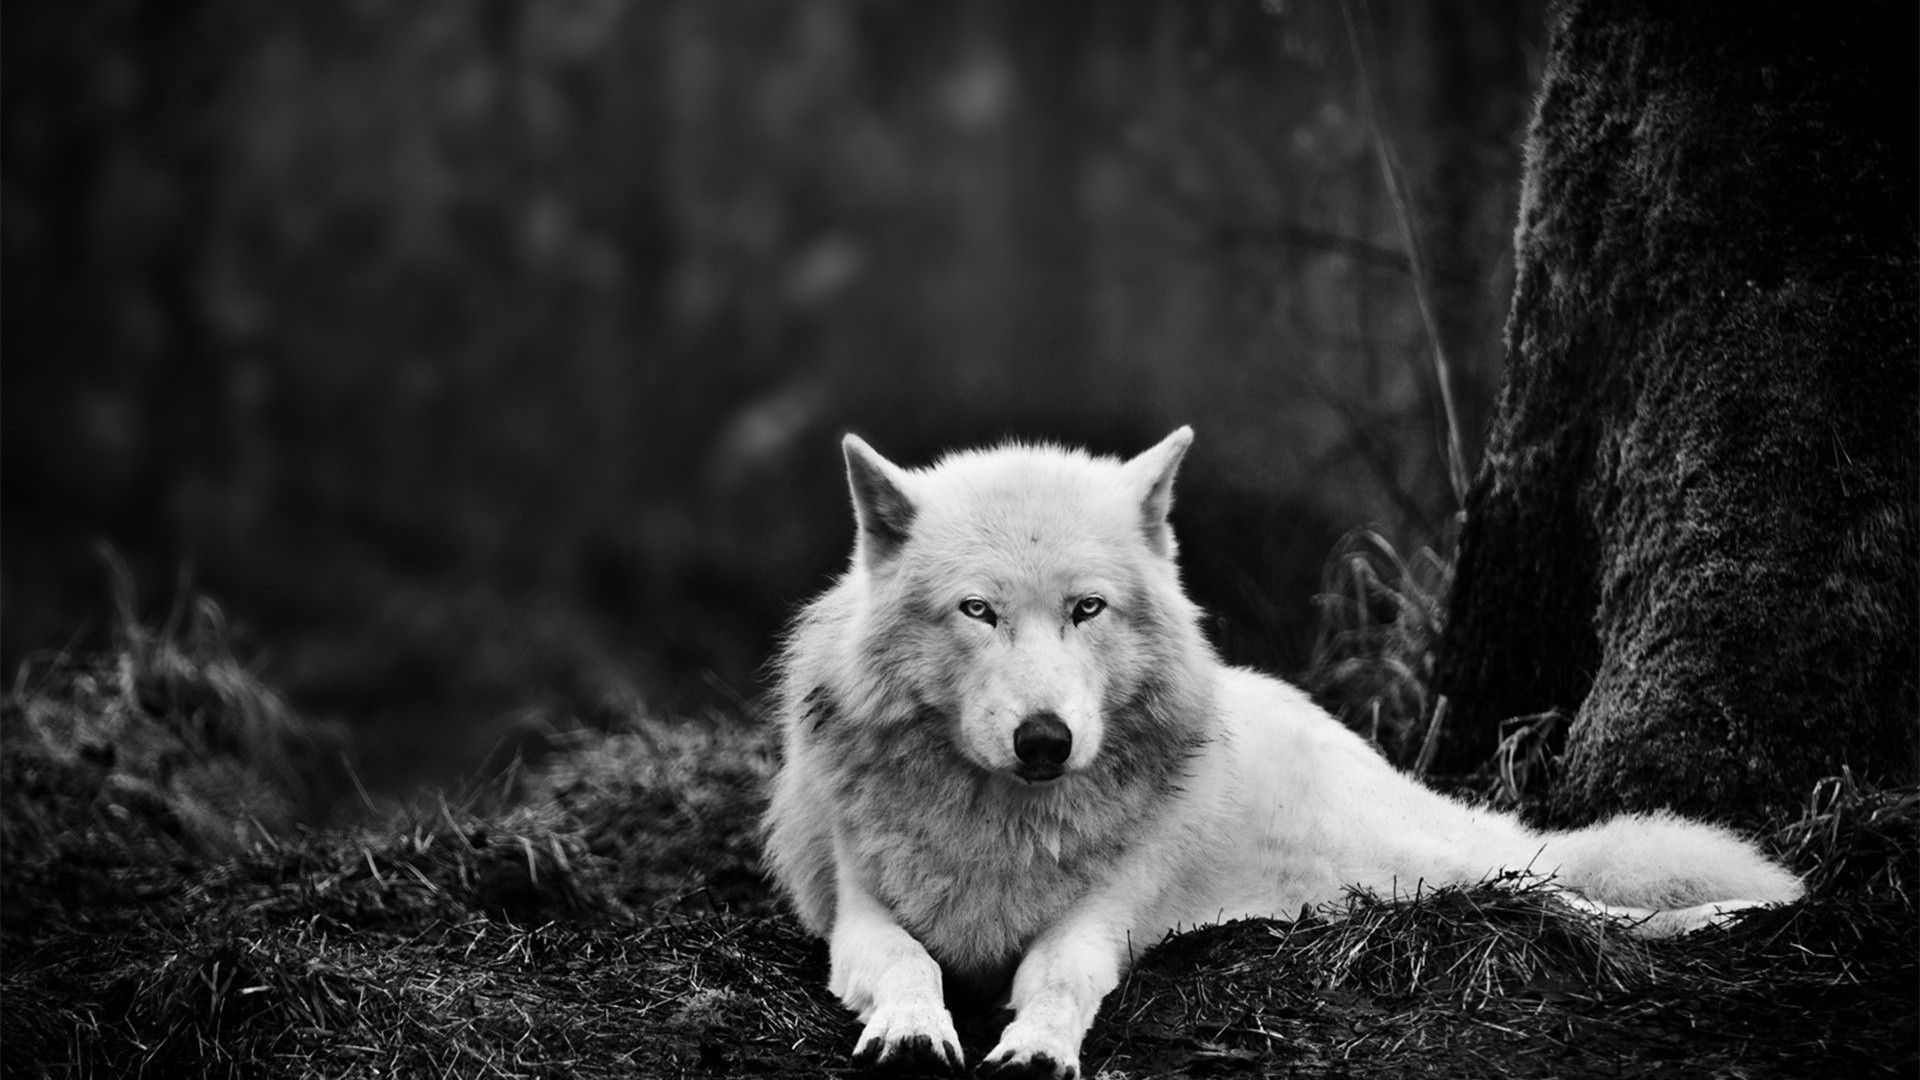 Black and White Wolf Wallpaper .wallpaperaccess.com